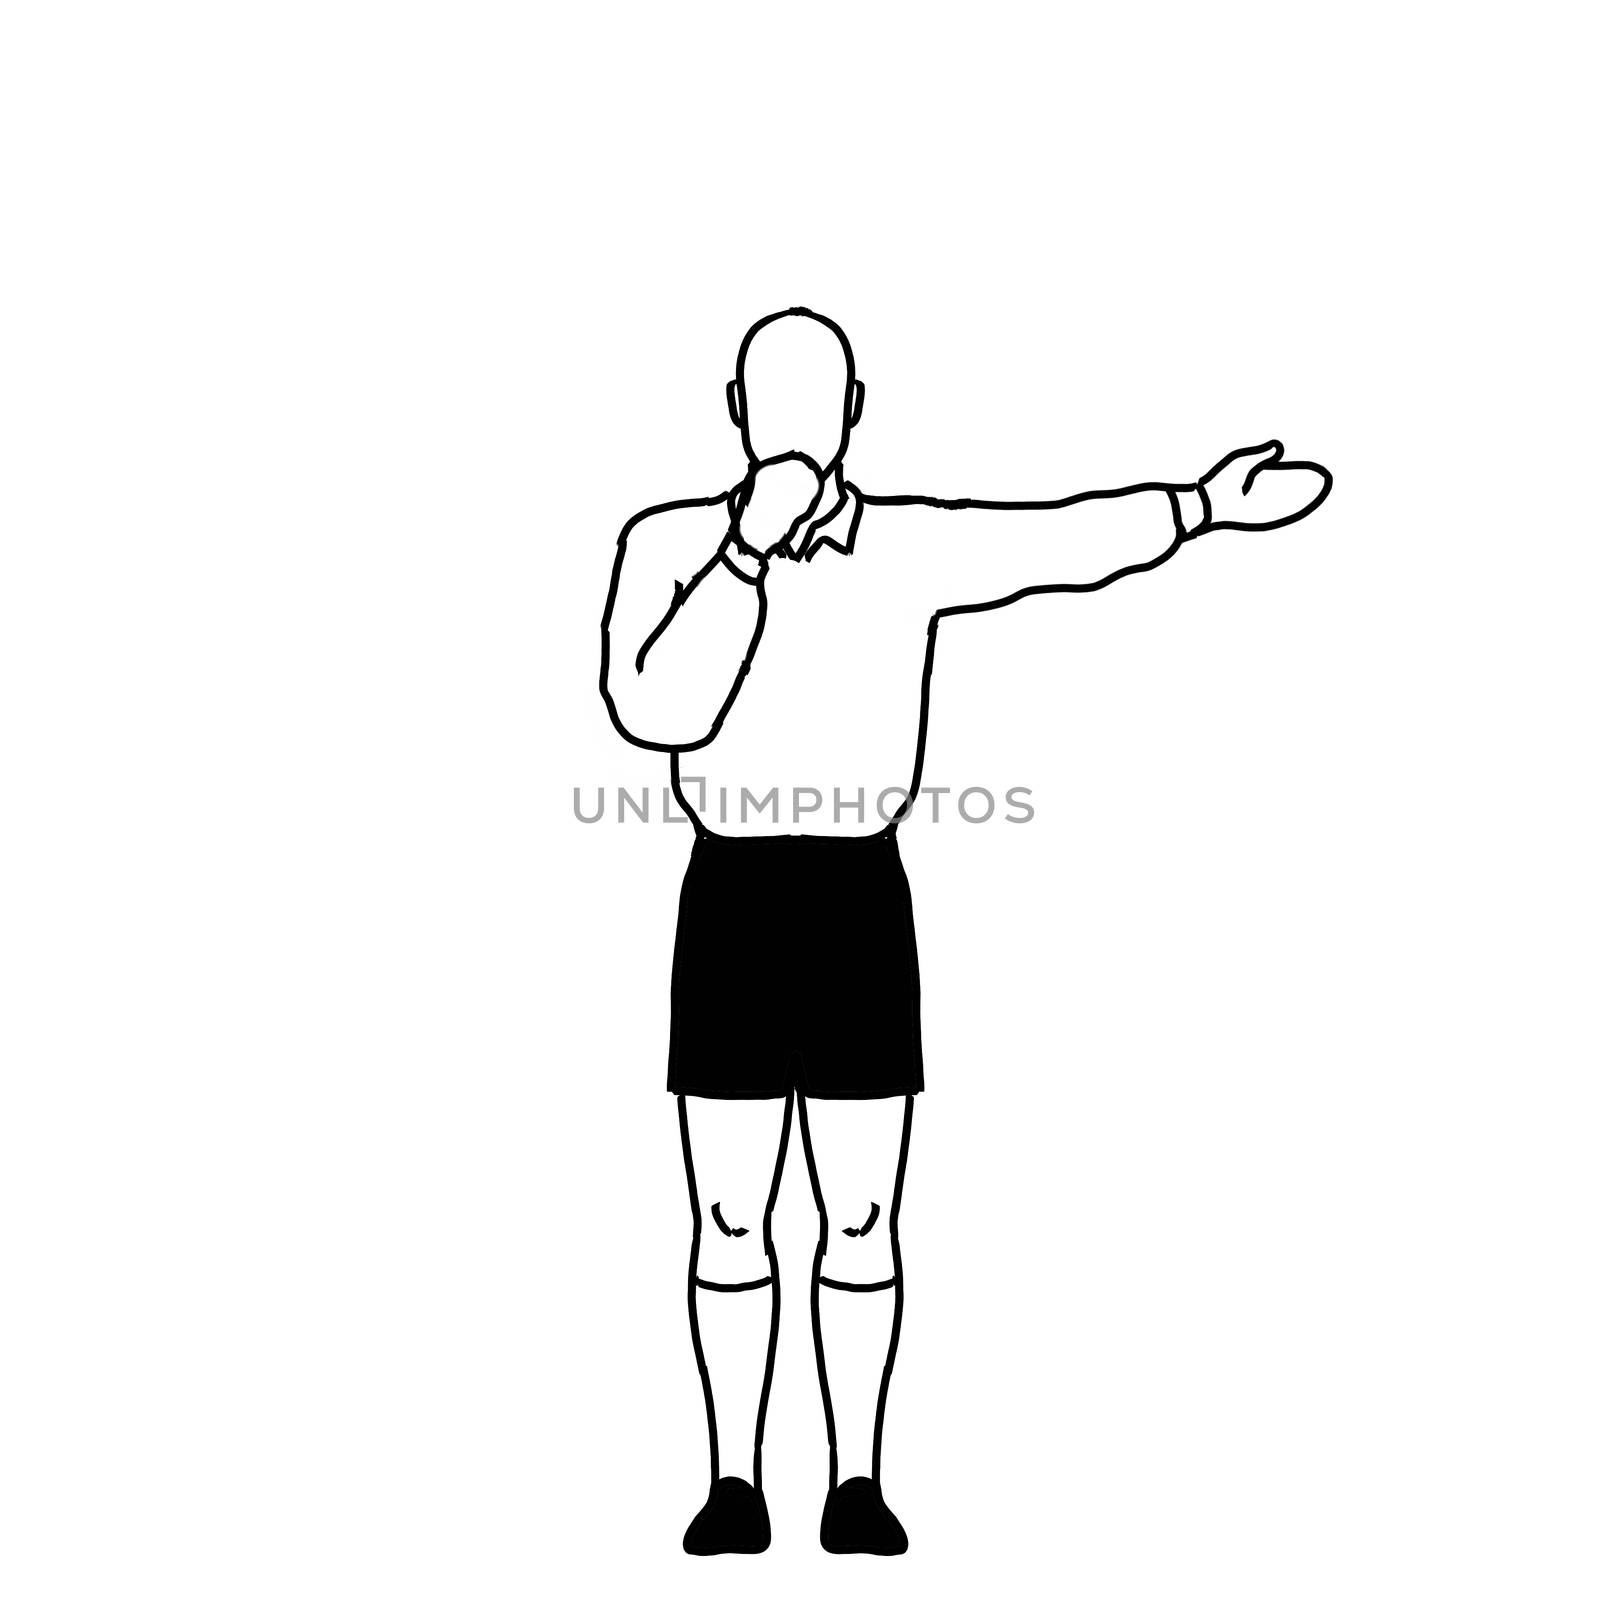 Retro style line drawing illustration showing a rugby referee with penalty Direct Free Kick hand signal on isolated background in black and white.